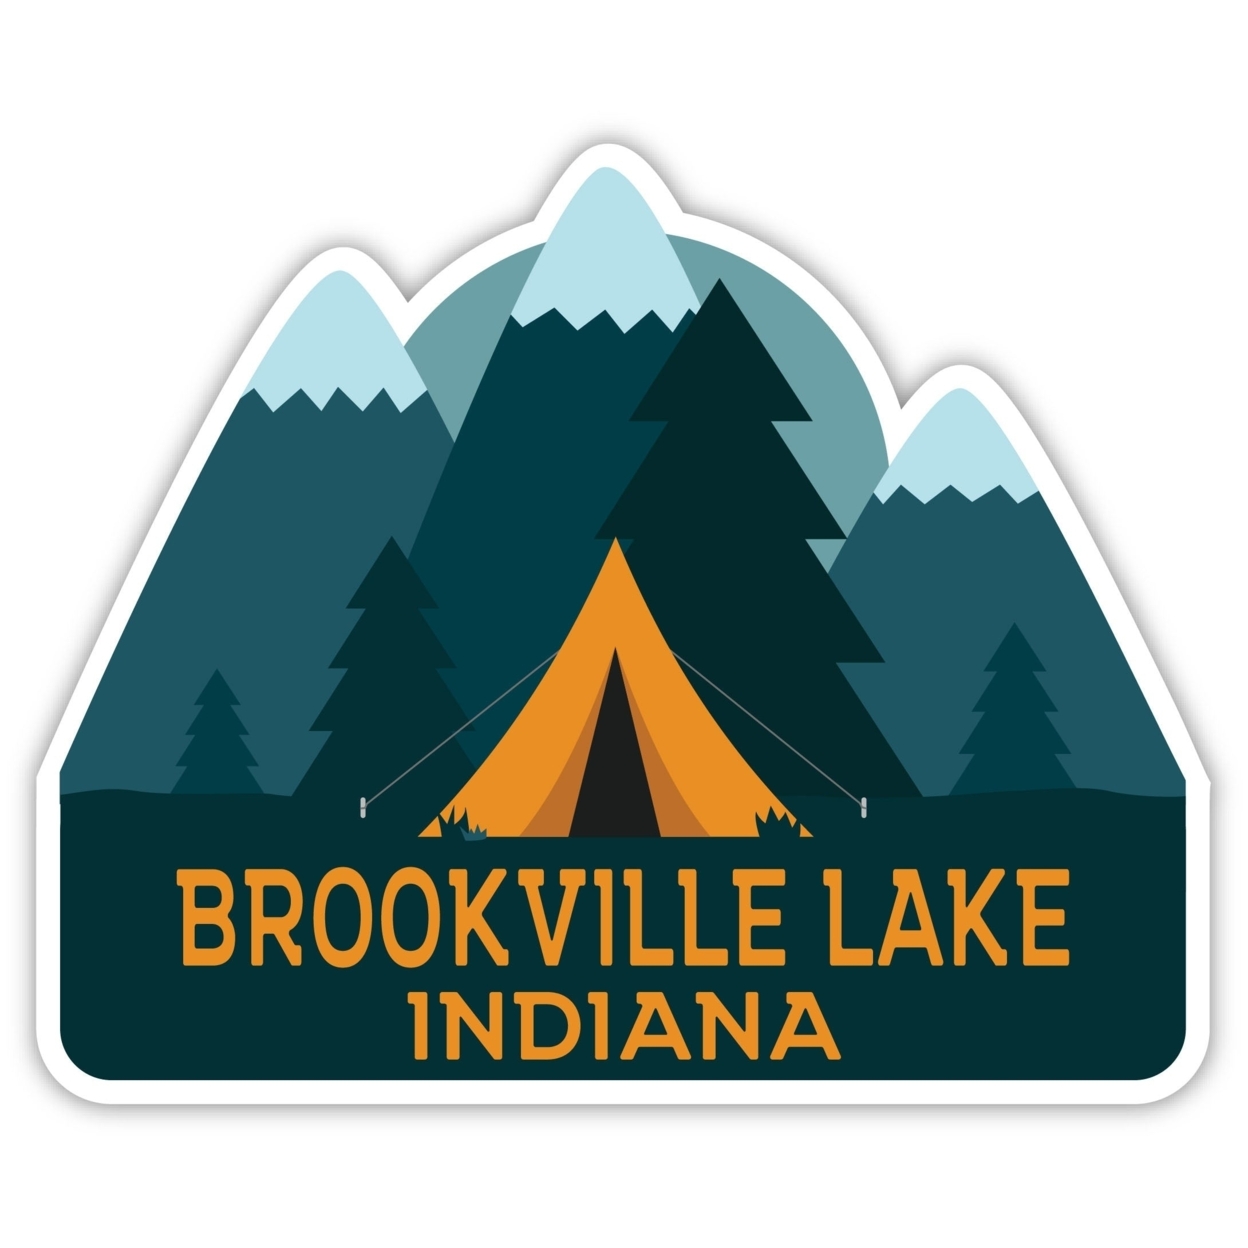 Brookville Lake Indiana Souvenir Decorative Stickers (Choose Theme And Size) - 4-Pack, 8-Inch, Tent